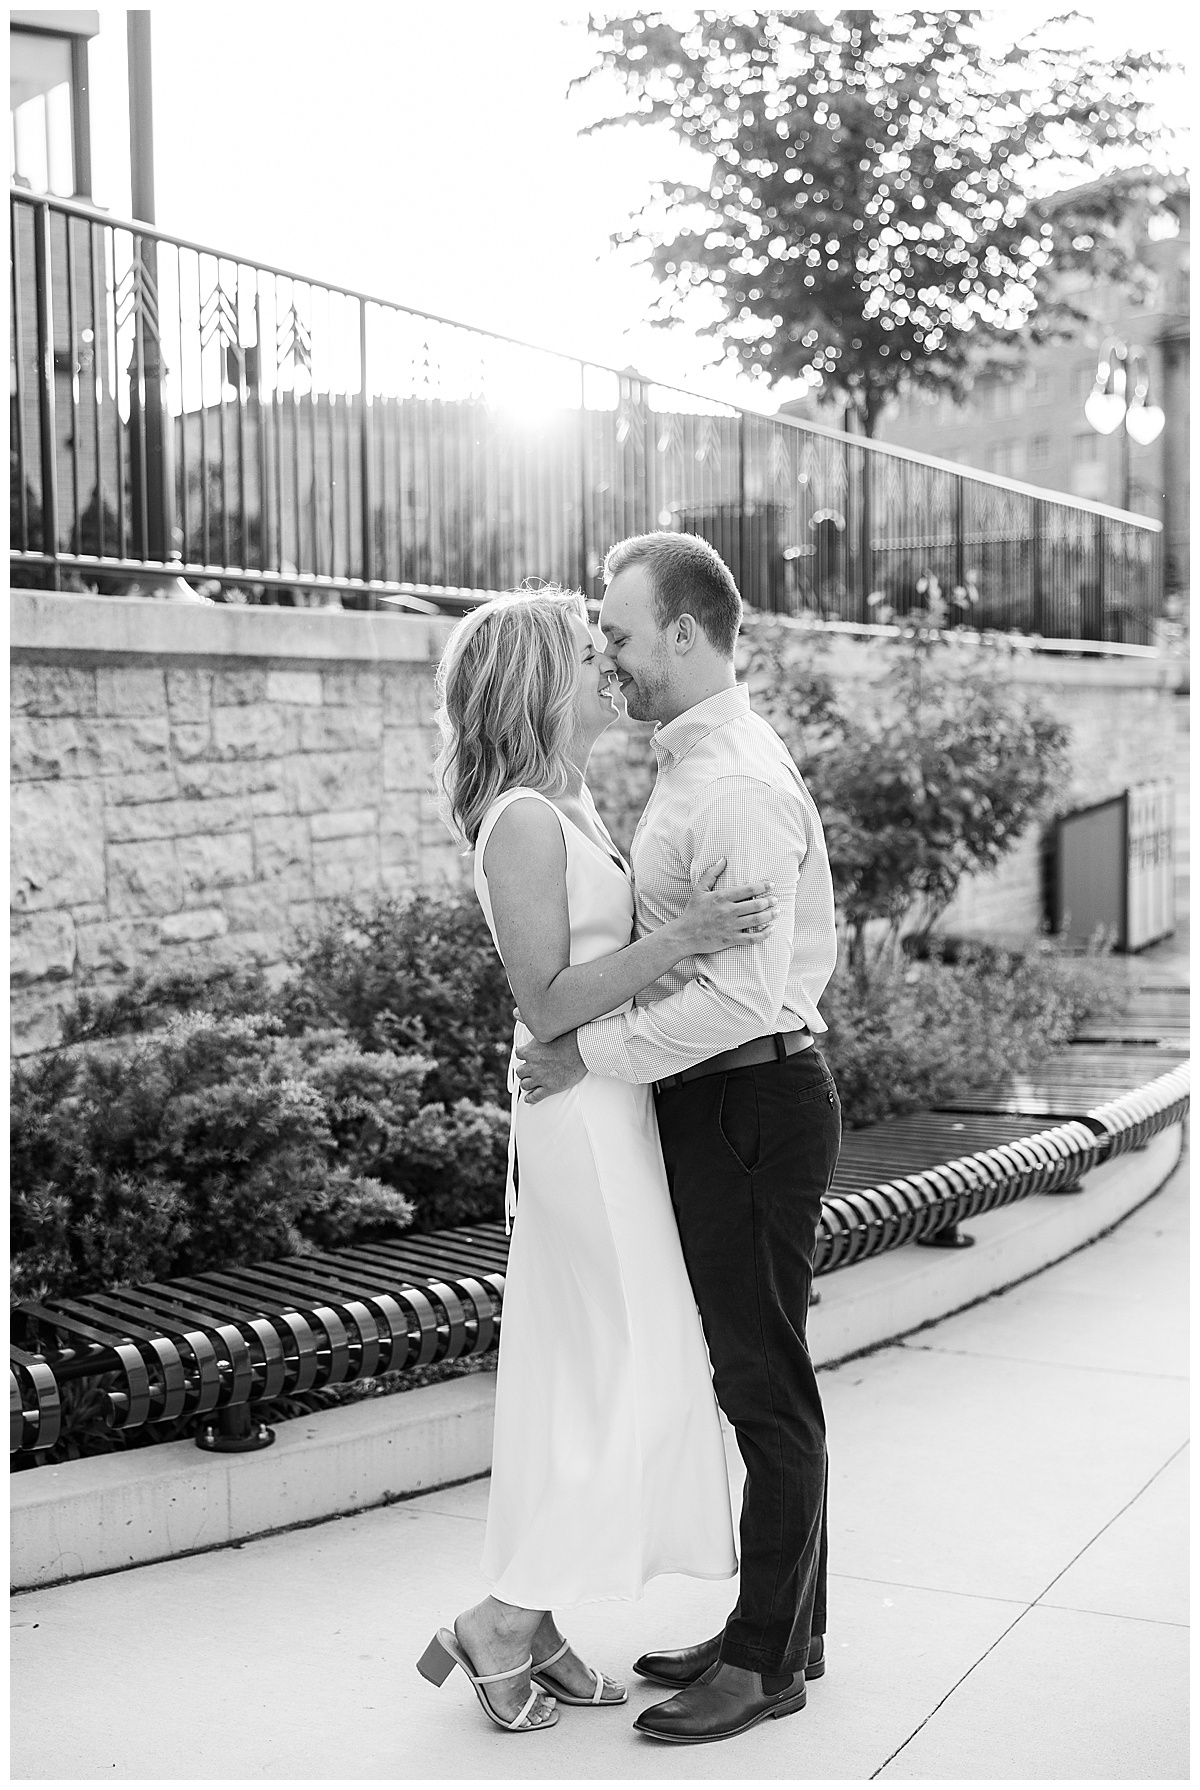 Downtown St. Charles Illinois engagement session